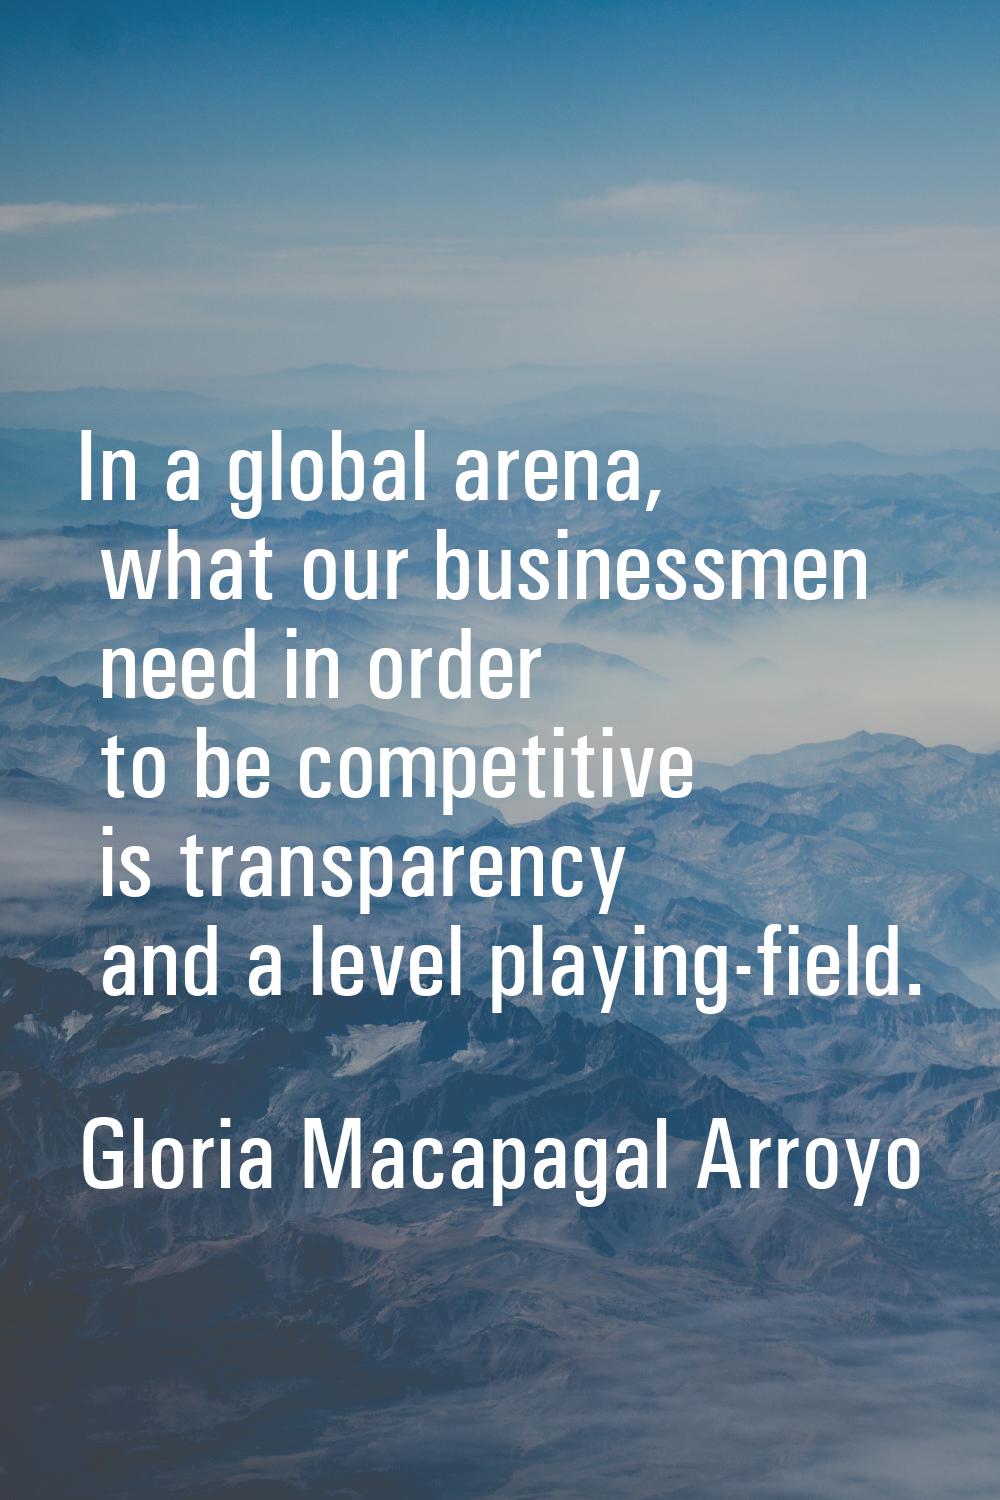 In a global arena, what our businessmen need in order to be competitive is transparency and a level